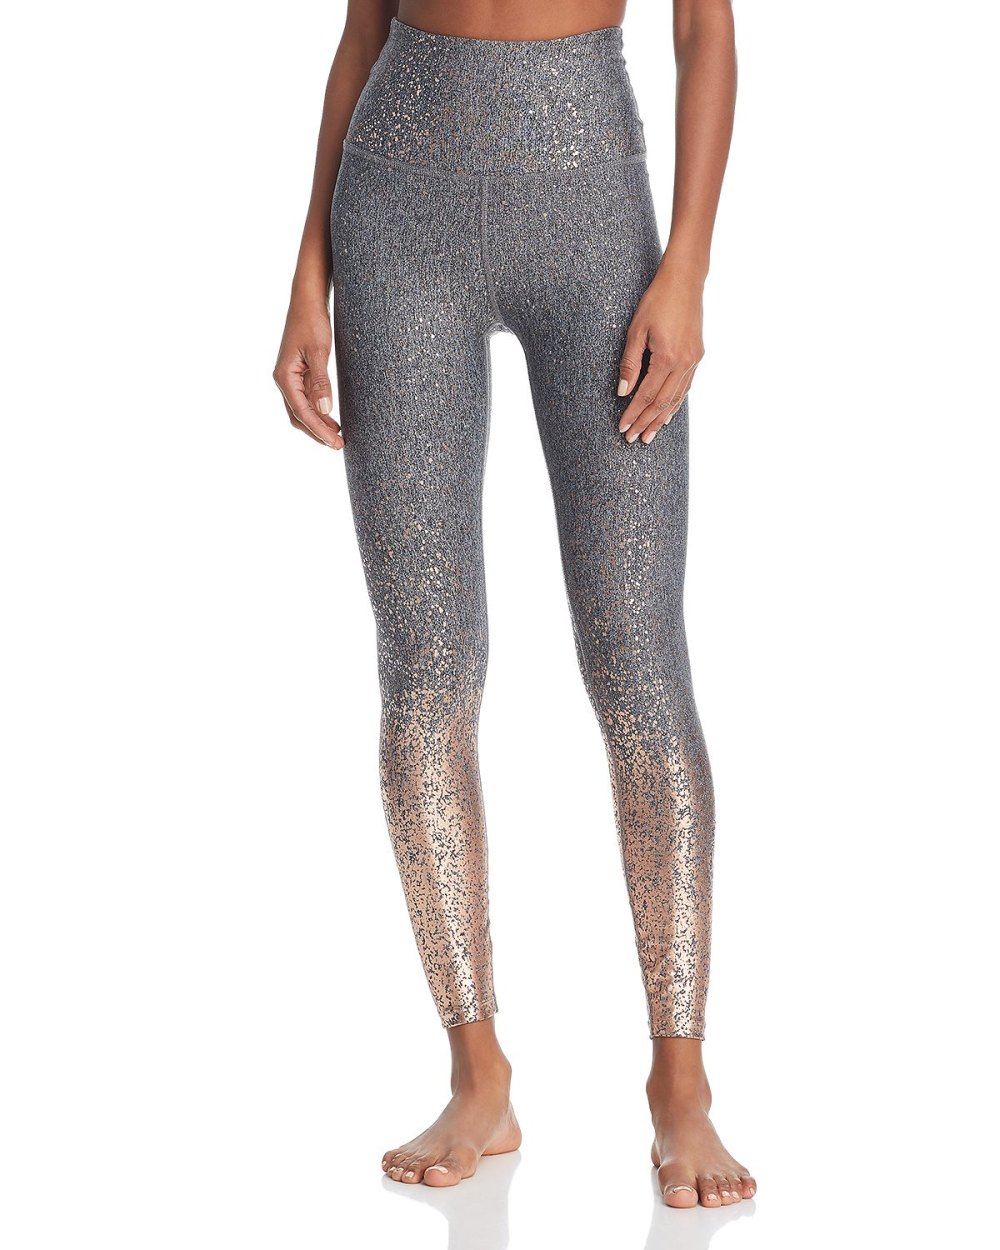 Blessing Mallas Gray Yoga Pants Outfit: Realce Glitter Leggings For Women,  Perfect For Fitness And Exercise From Mucho, $20.19